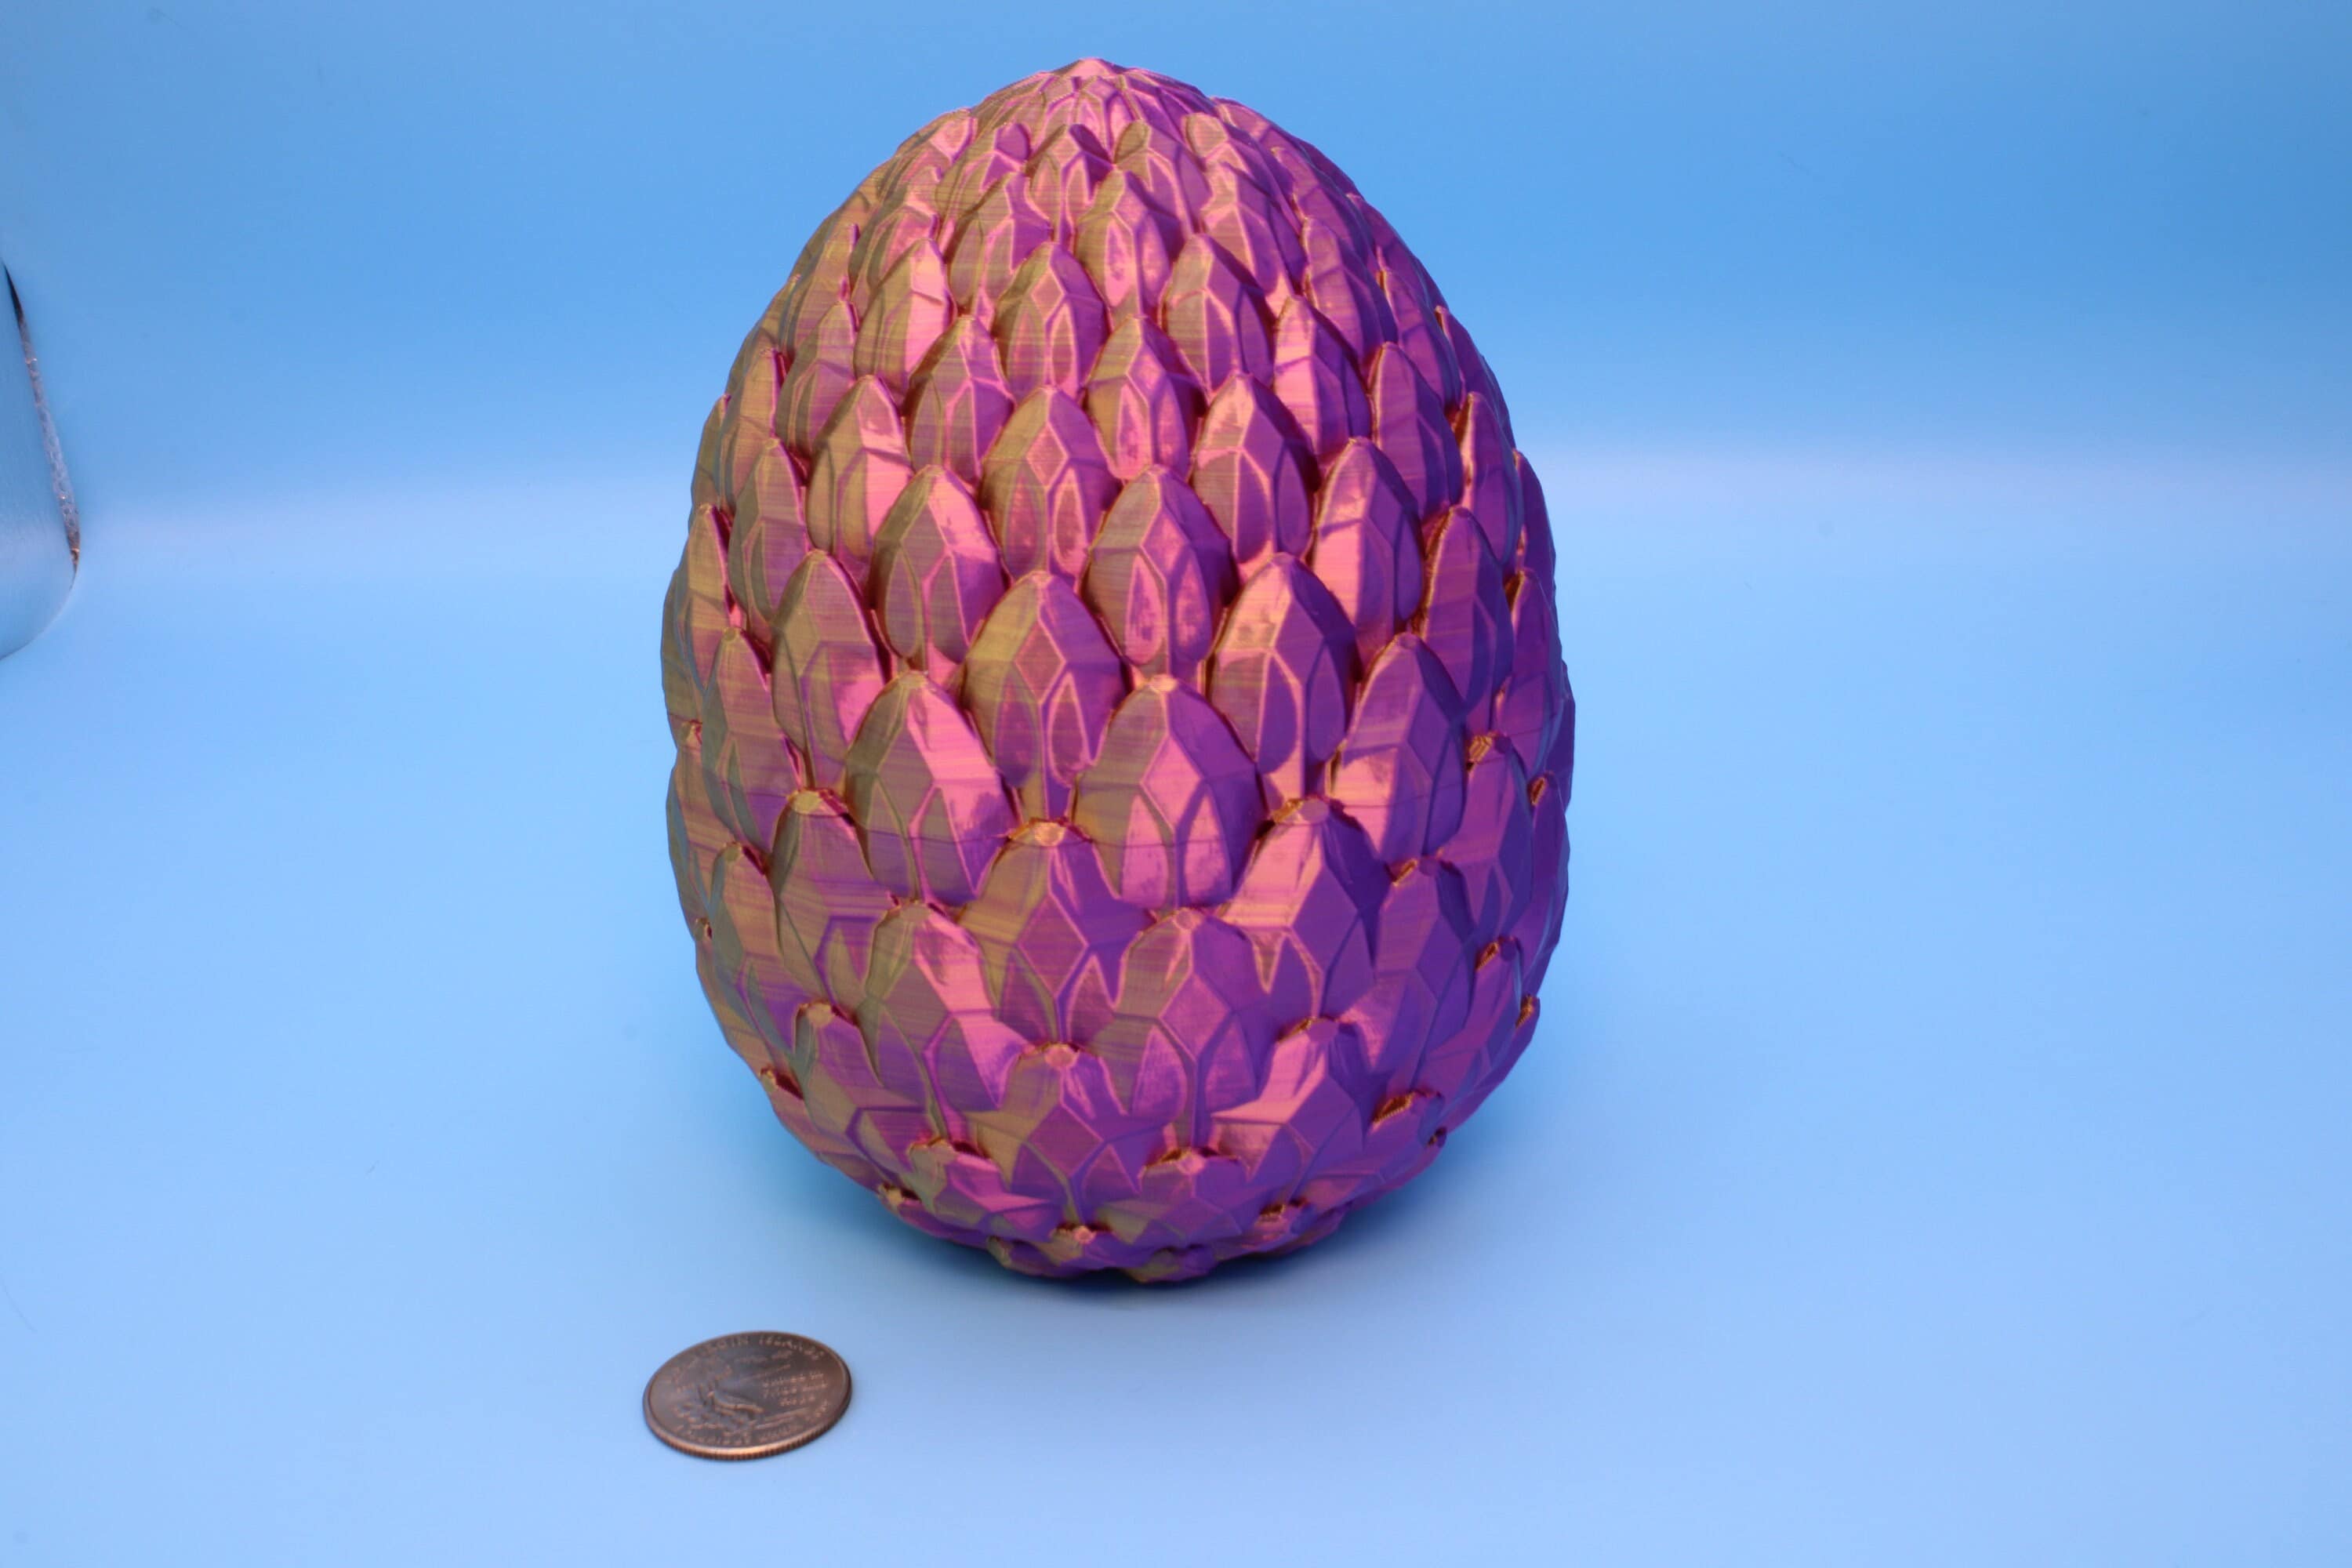 Dragon Scale Egg- Brown | 3D printed | Dragon Egg Storage! | 6 in. Dragon Scale Egg | Gift. Decorative Egg